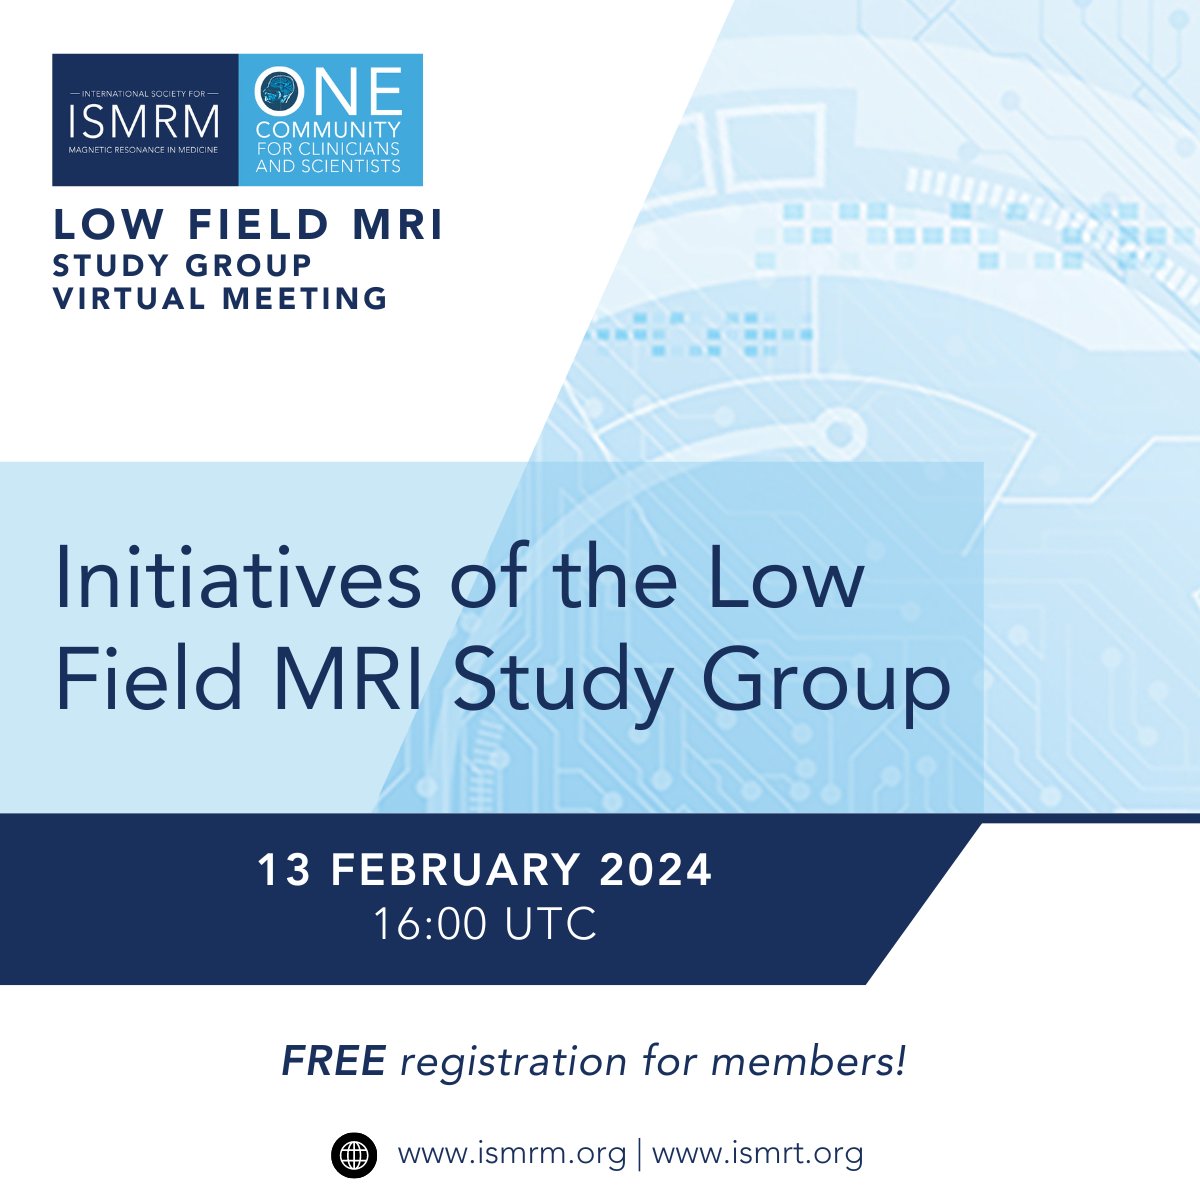 Join the discussion and learn all about the new Low Field MRI Study Group in this interactive virtual meeting: Initiatives of the Low Field MRI Study Group 13 February 2024 | 16:00 UTC FREE registration for members! Learn more: ow.ly/ssH650Qy7zA #ISMRM #ISMRT #LowFieldMRI